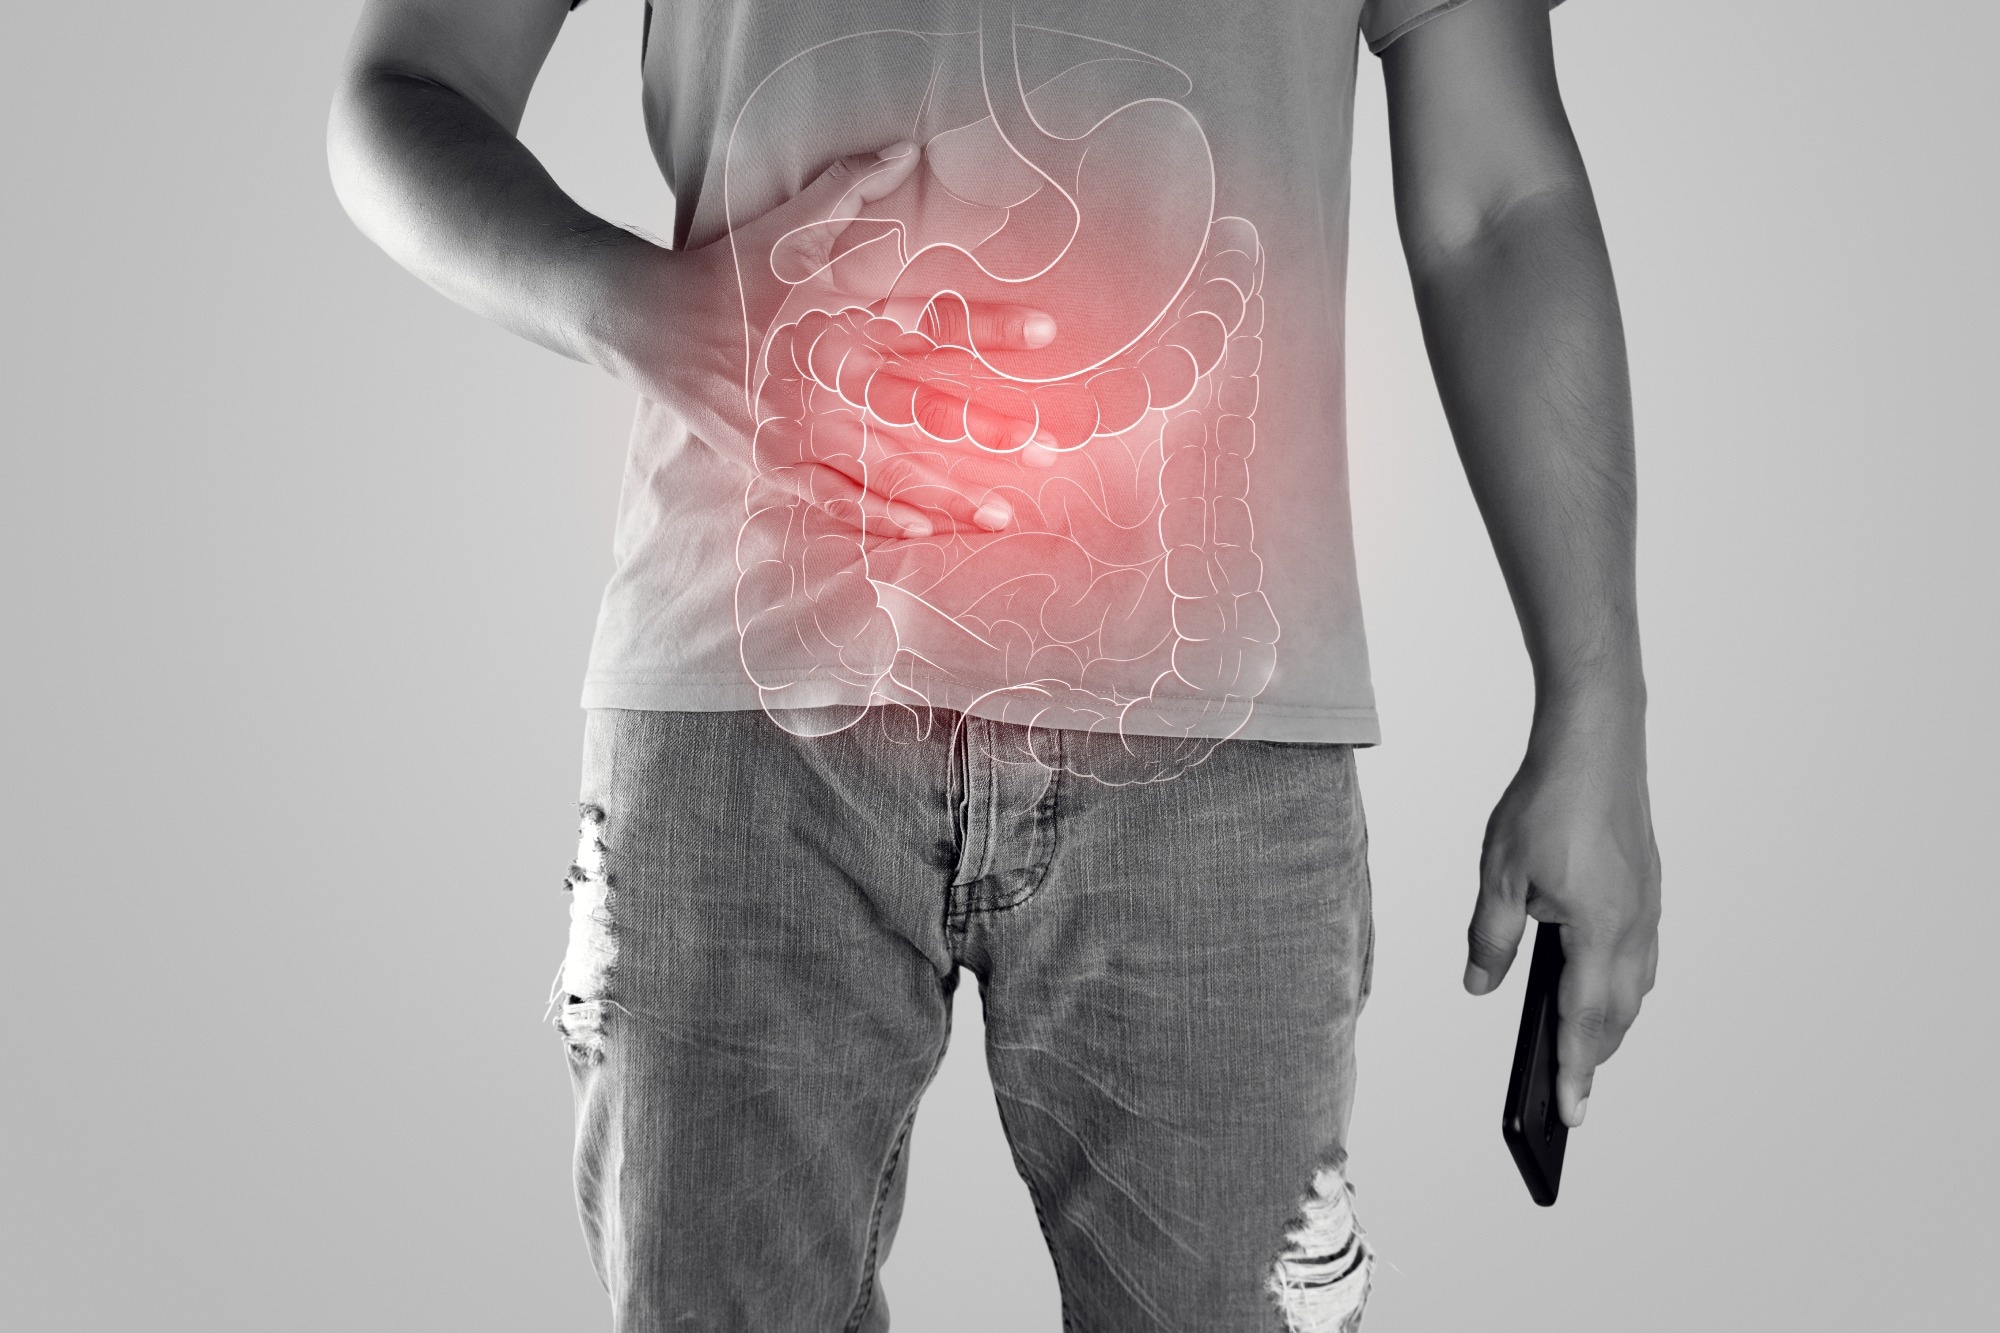 Is long COVID triggering irritable bowel syndrome? Arizona study to investigate